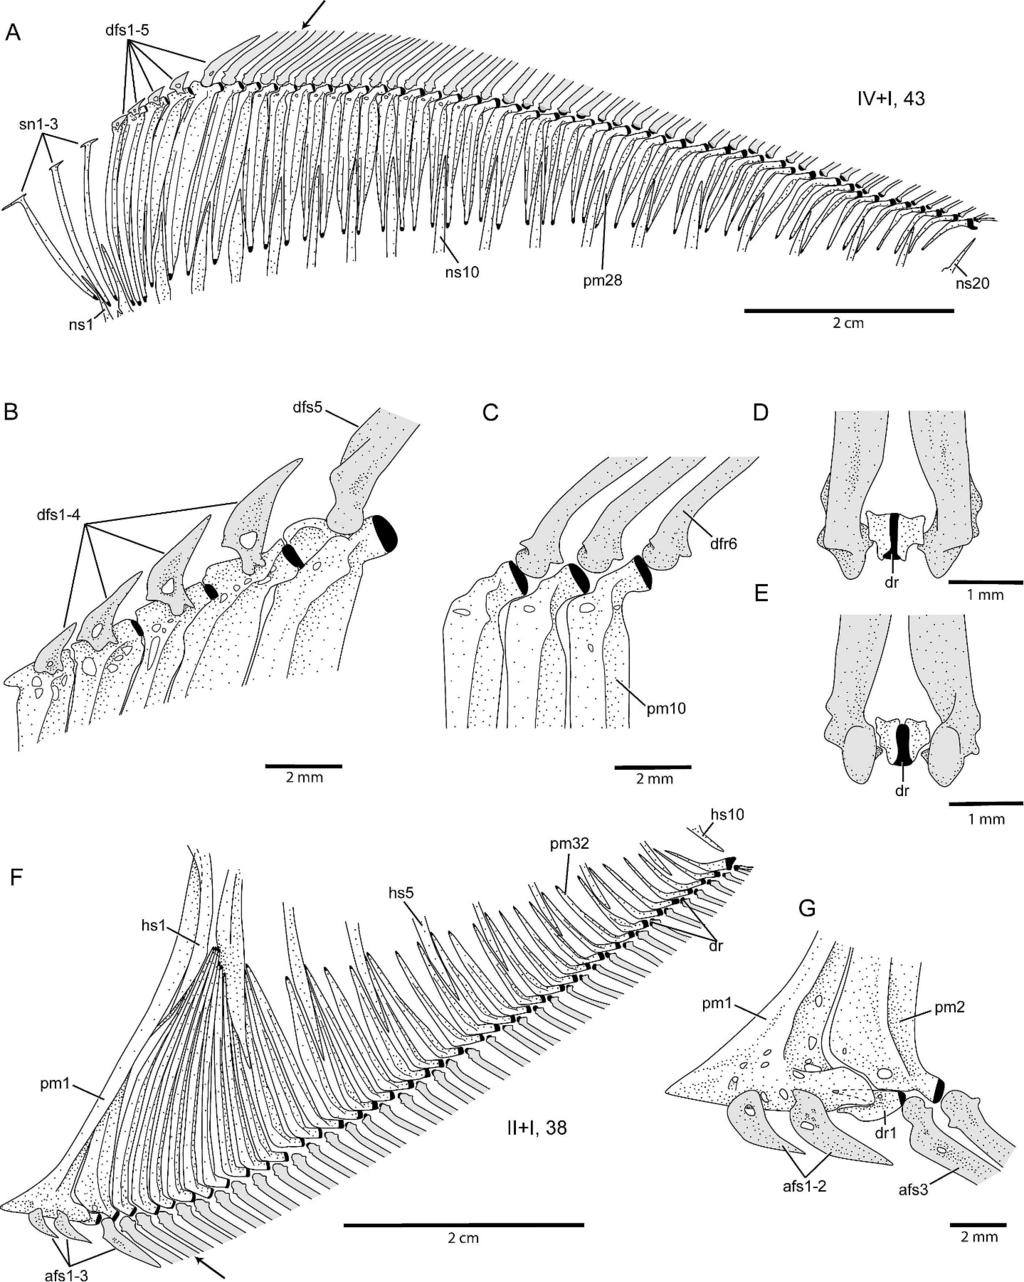 322 Copeia 2010, No. 2 Fig. 10. Median fin supports of Parastromateus niger (ANSP 62088, 120 mm SL).